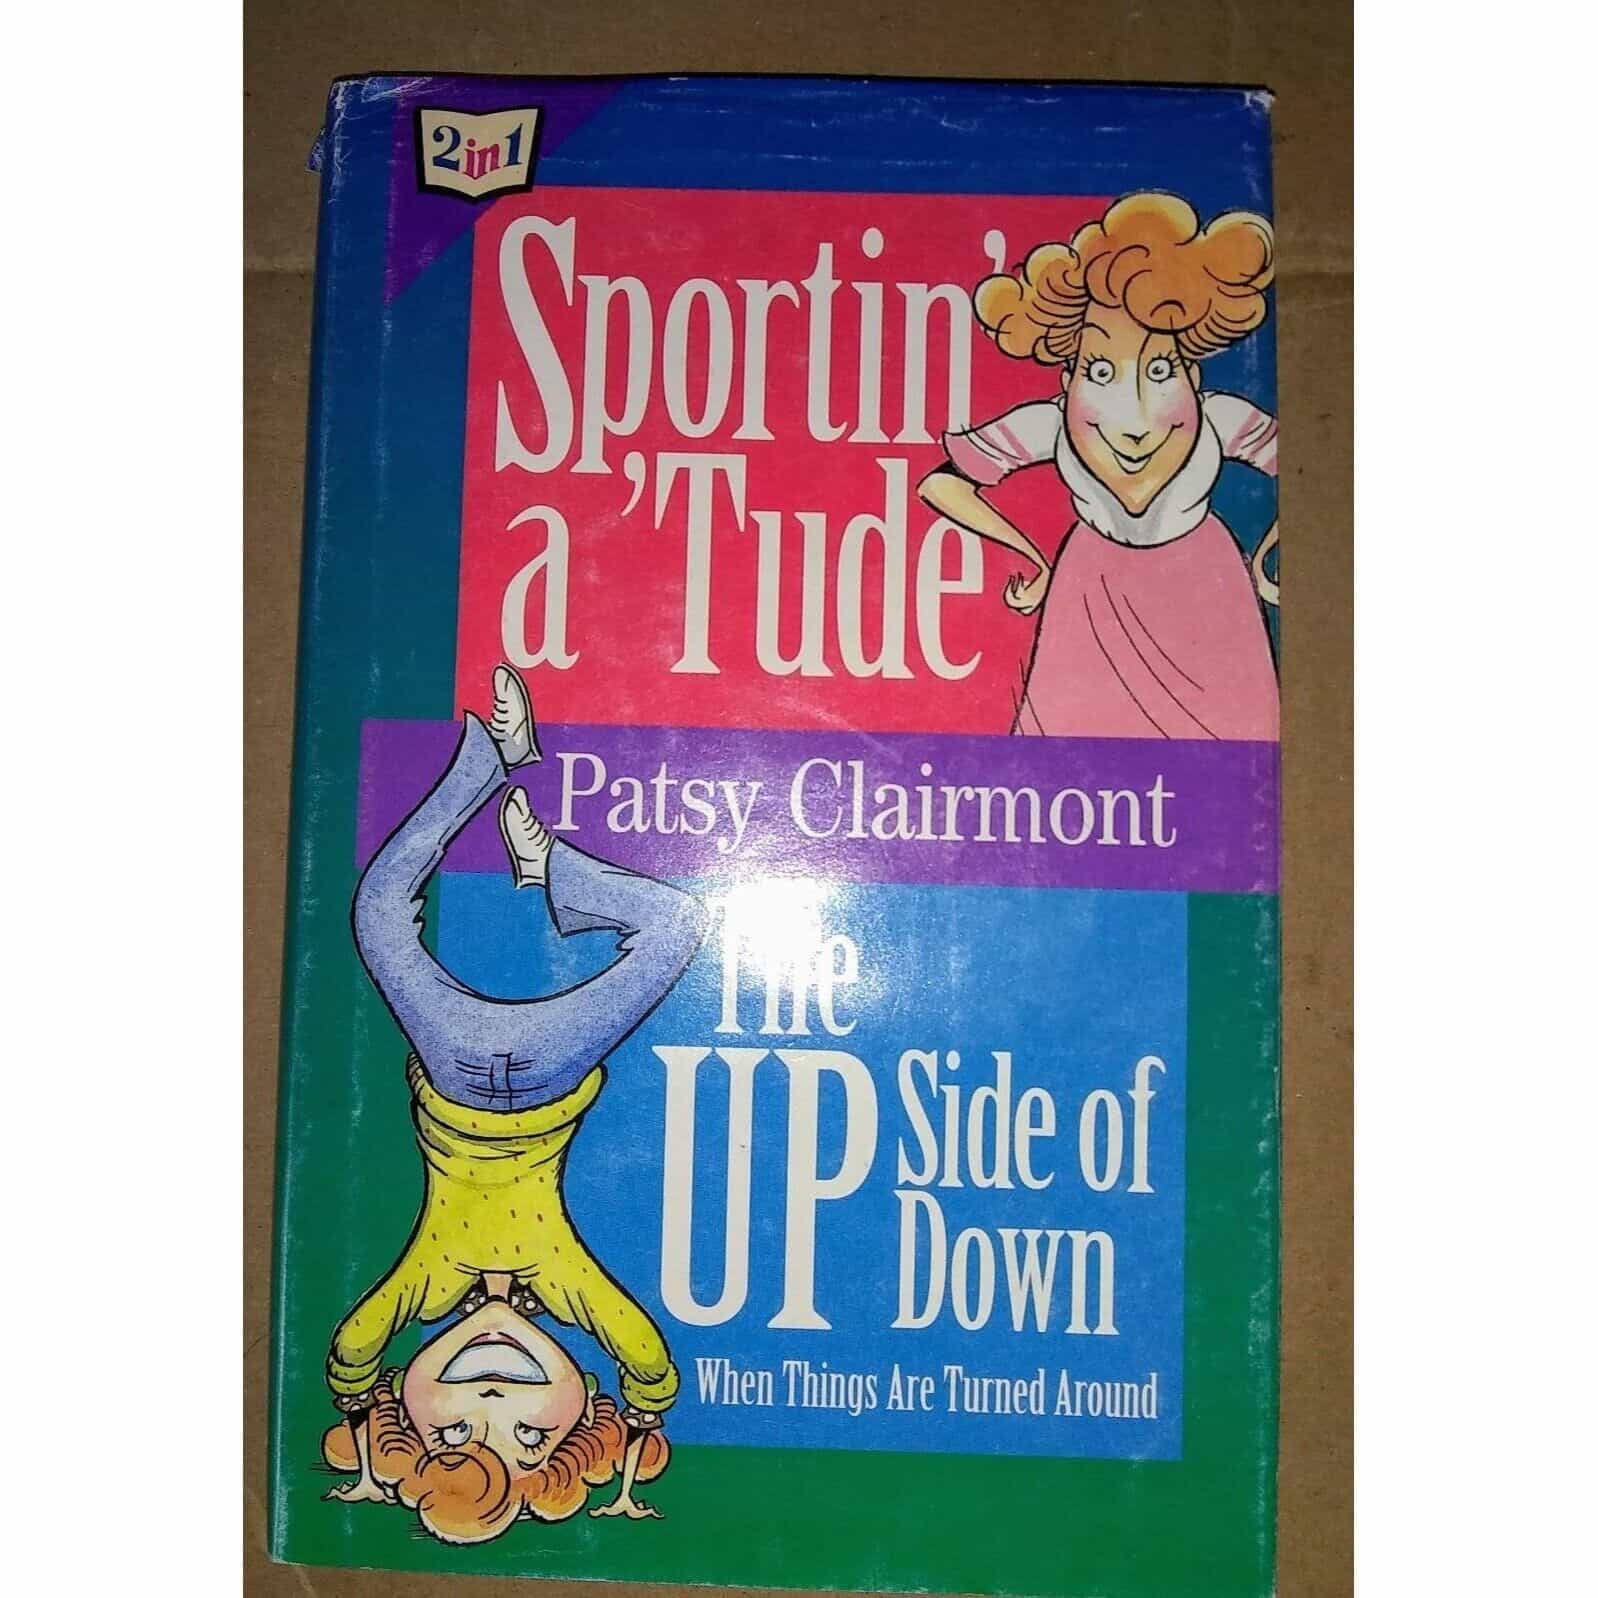 Sportin’ a Tude by Patsy Clairmont